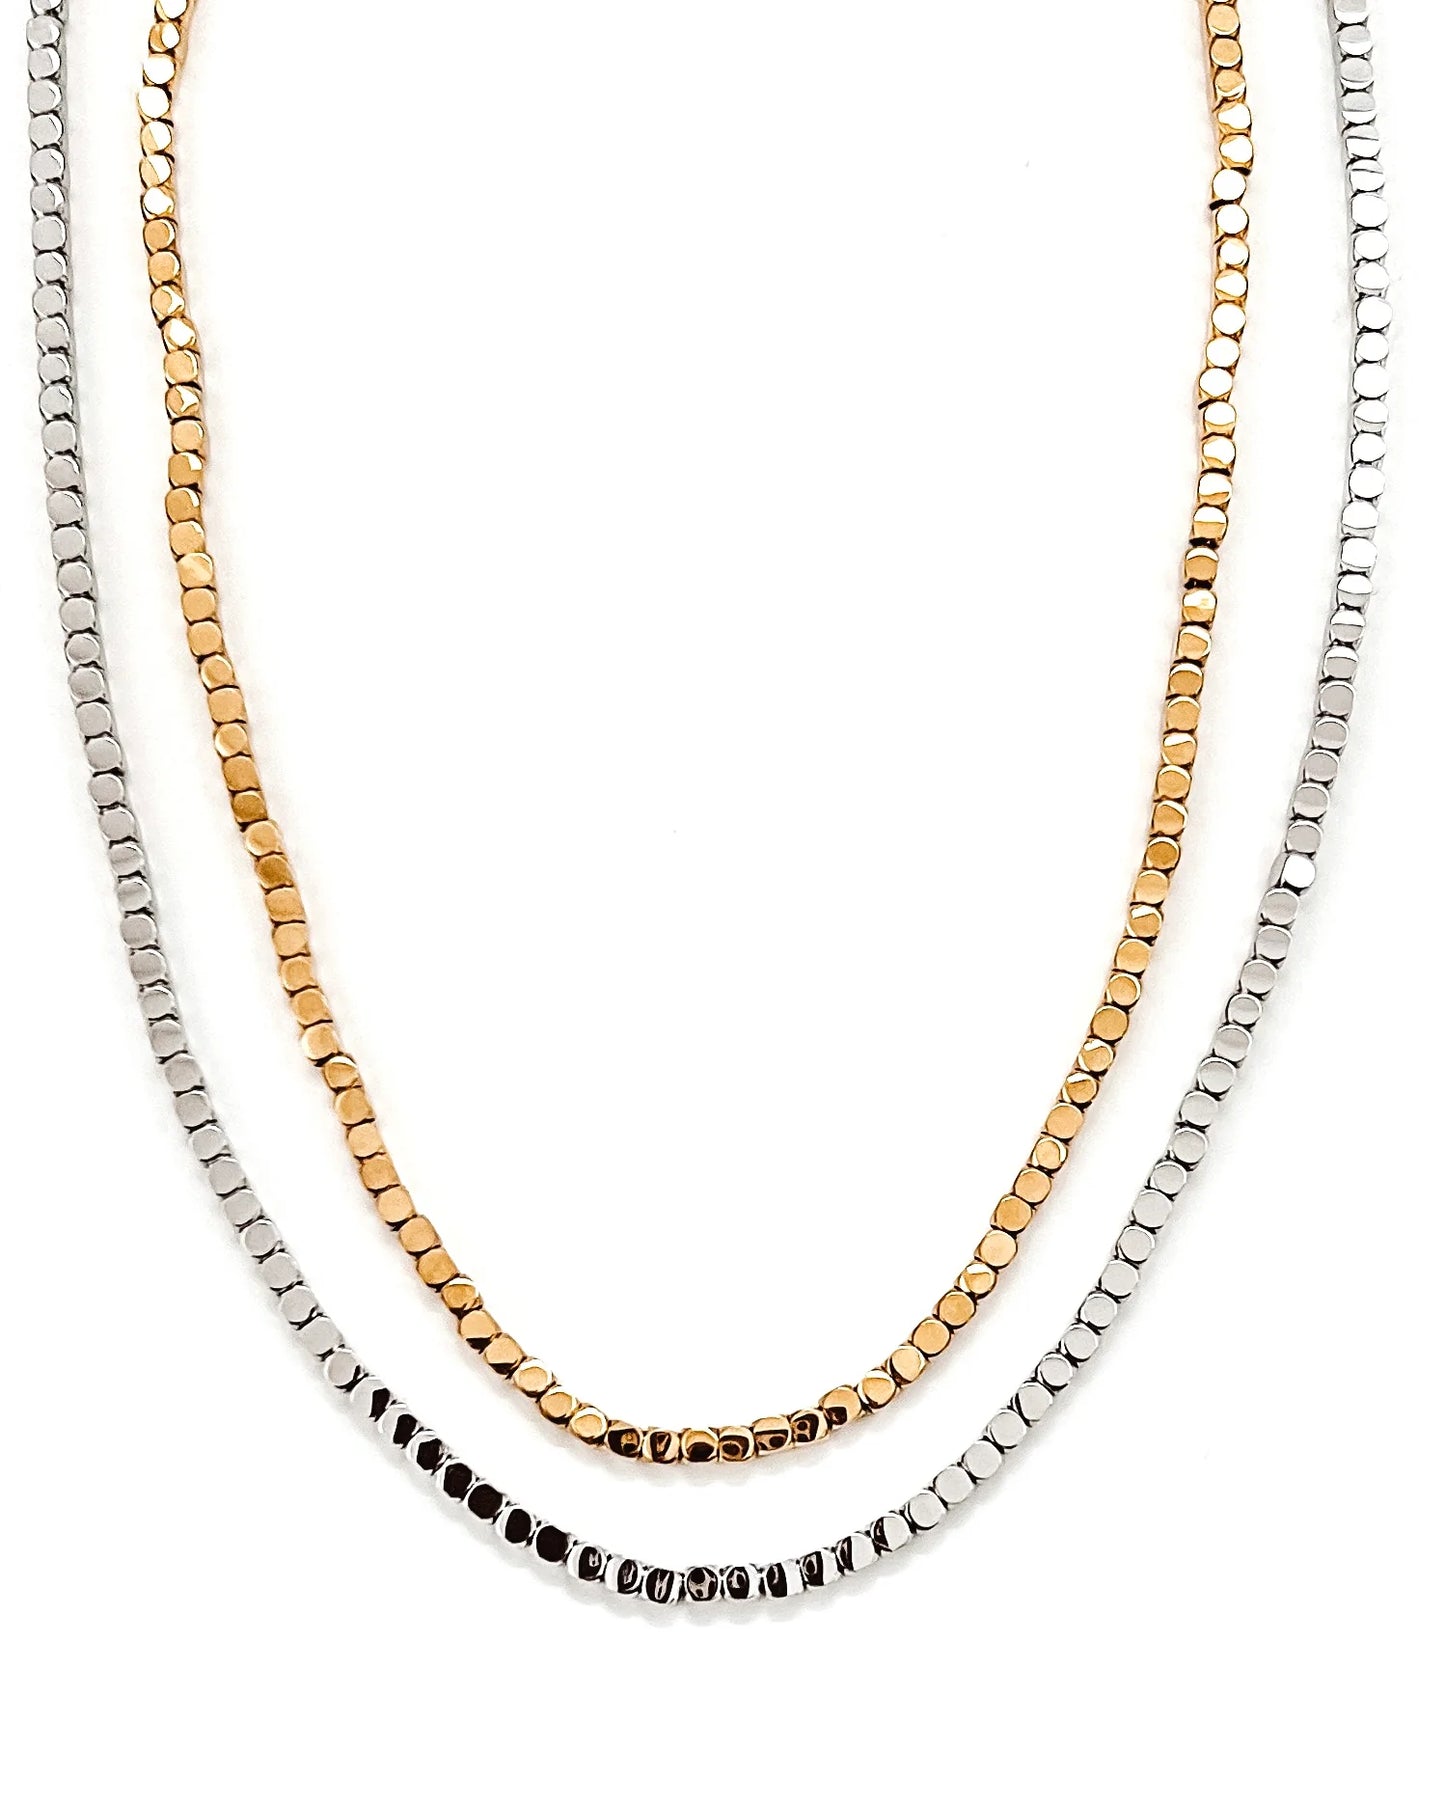 Lenora Beaded Necklace - Gold